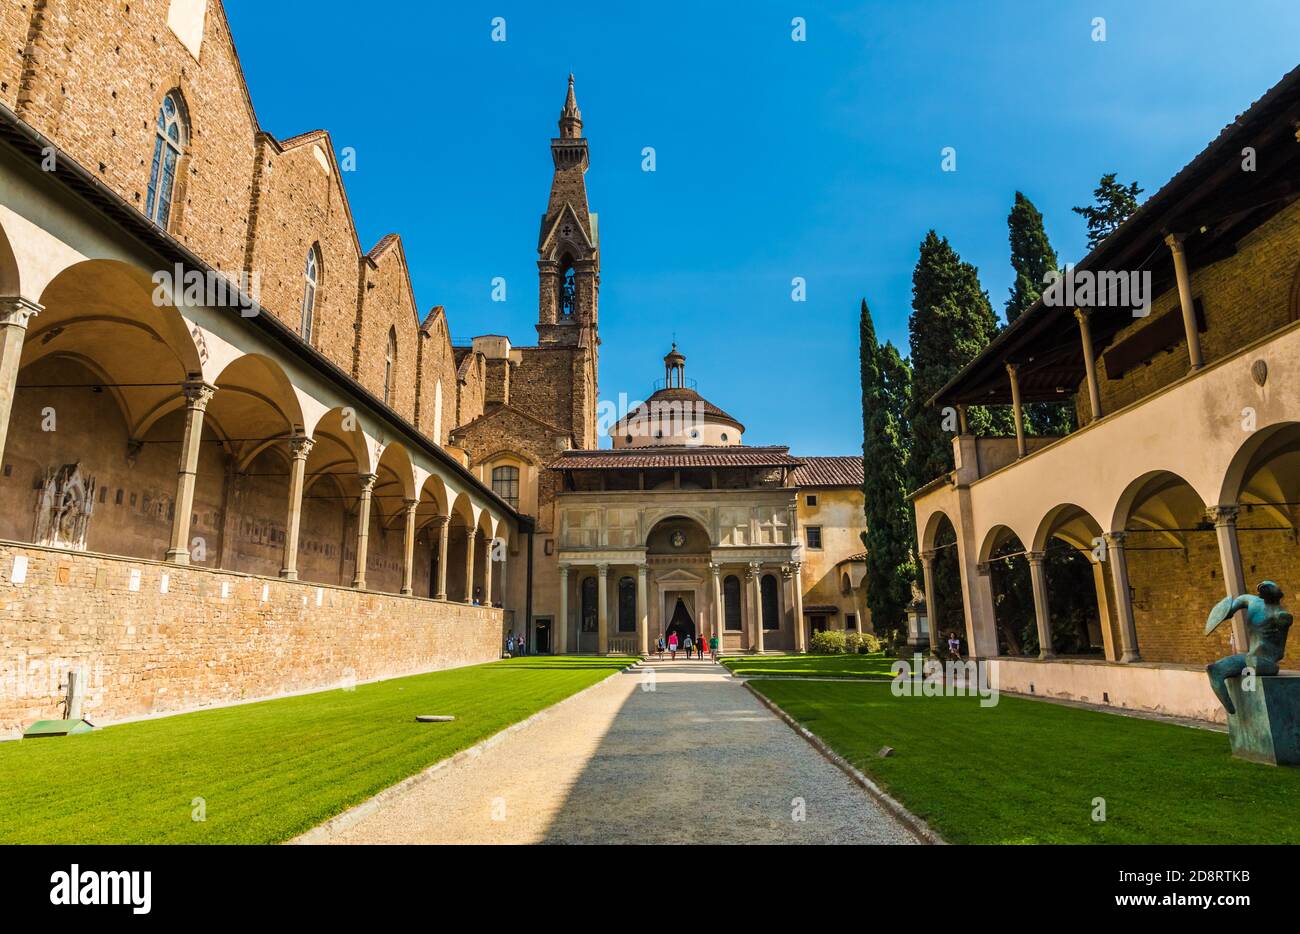 Beautiful view of the Pazzi Chapel, the first cloister with the bell tower of the Basilica di Santa Croce in Florence. The entryway is an arch with... Stock Photo